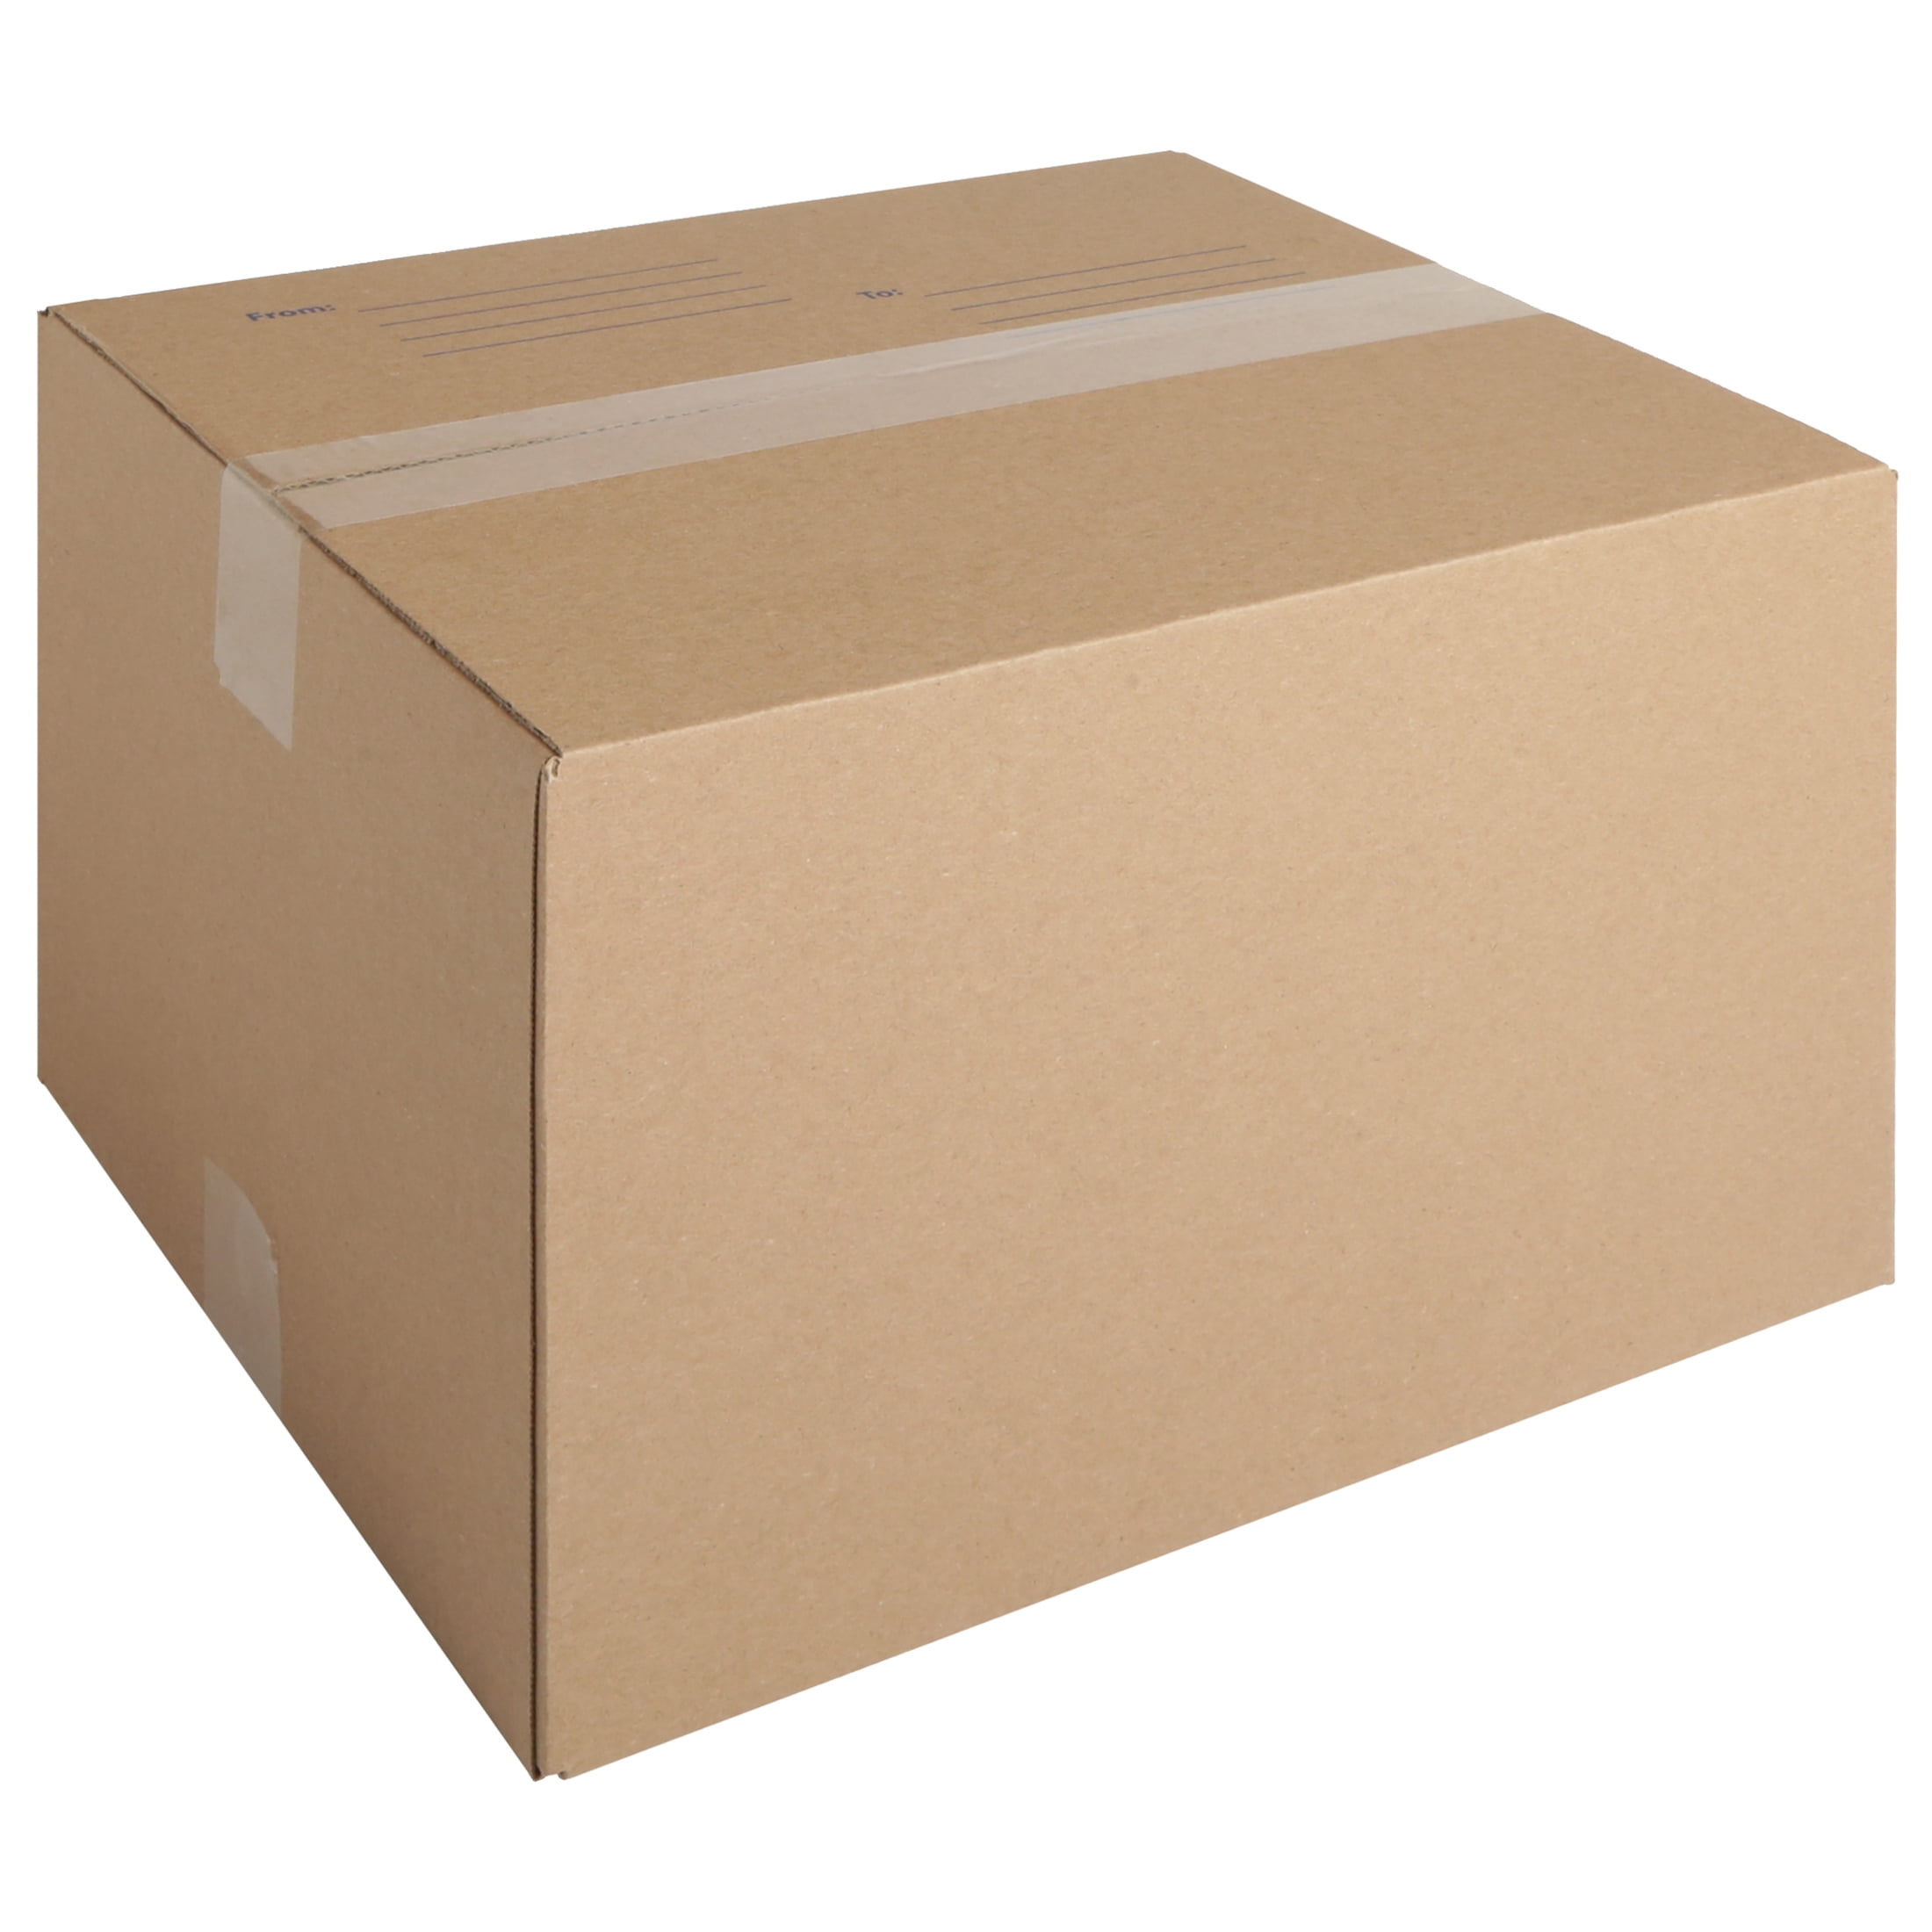 Pen+Gear Recycled Shipping Boxes 15 in. L x 12 in. W x 10 in. H, 30-Count 